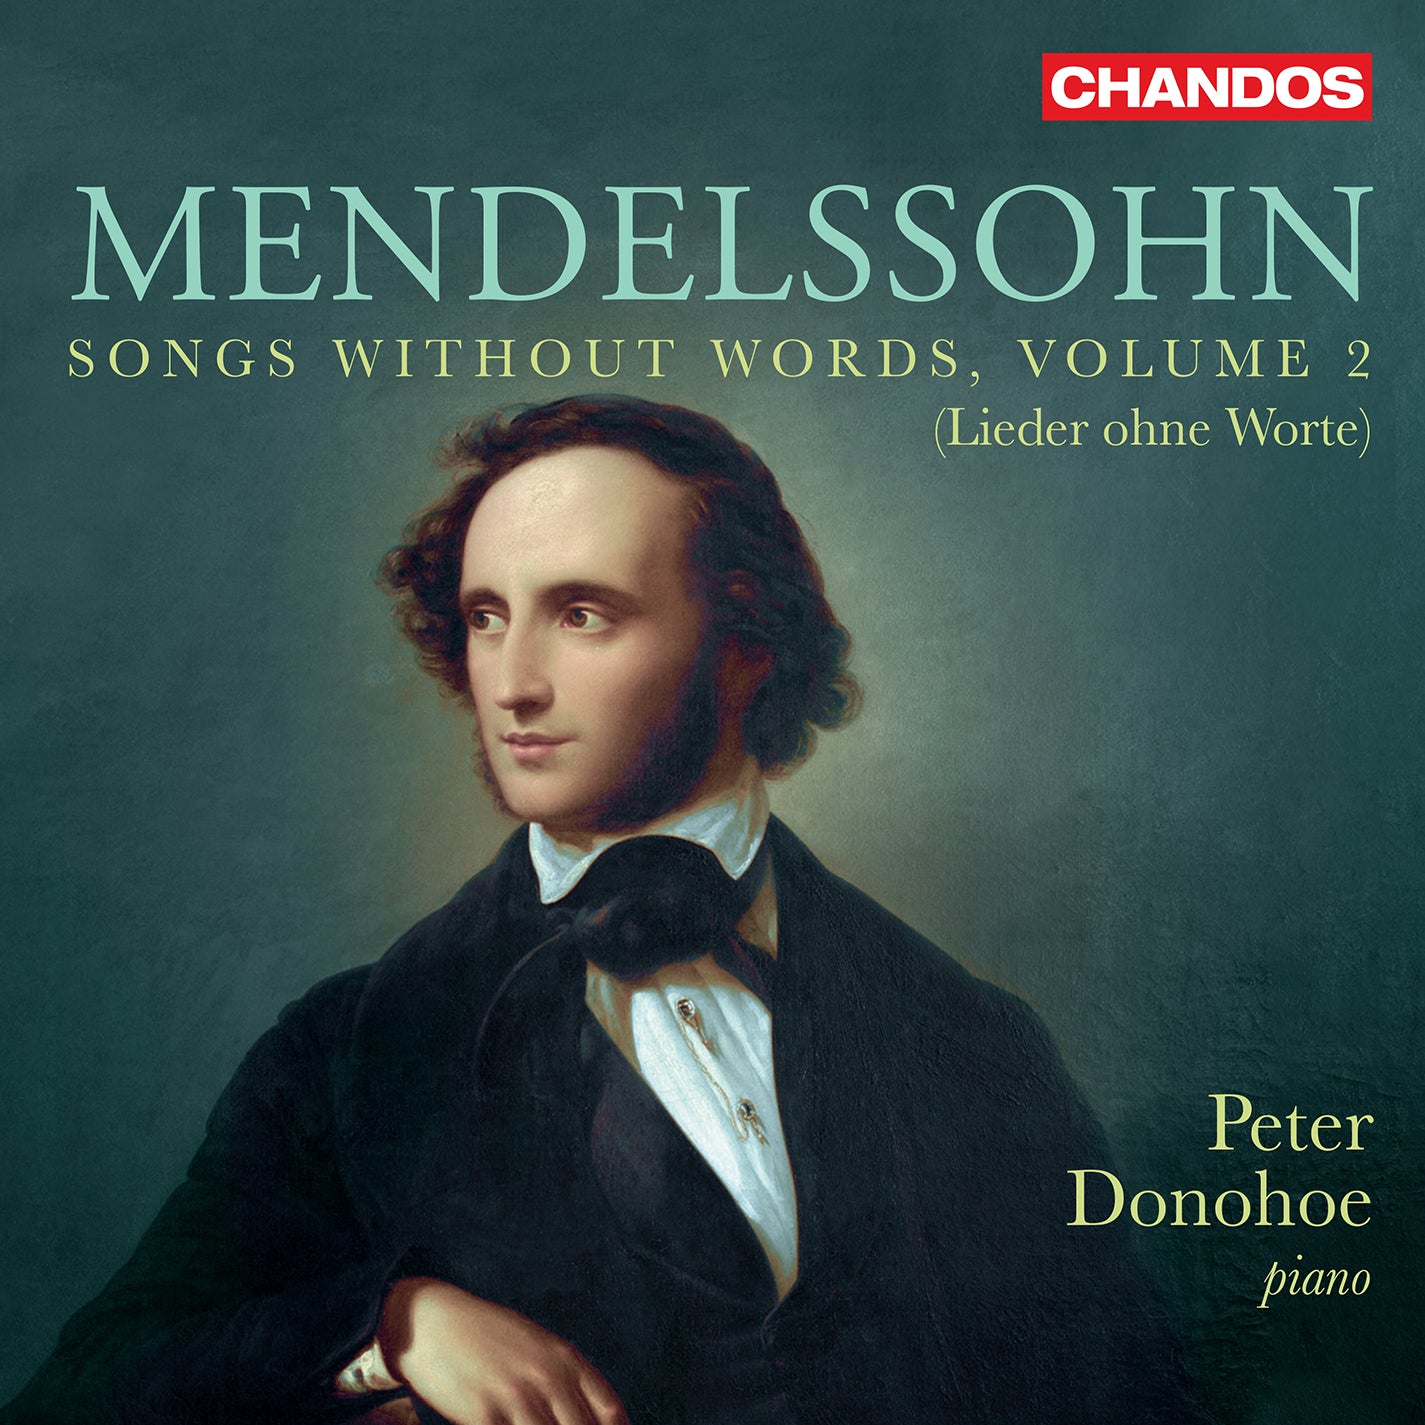 Mendelssohn: Songs without Words, Vol. 2 / Peter Donohoe